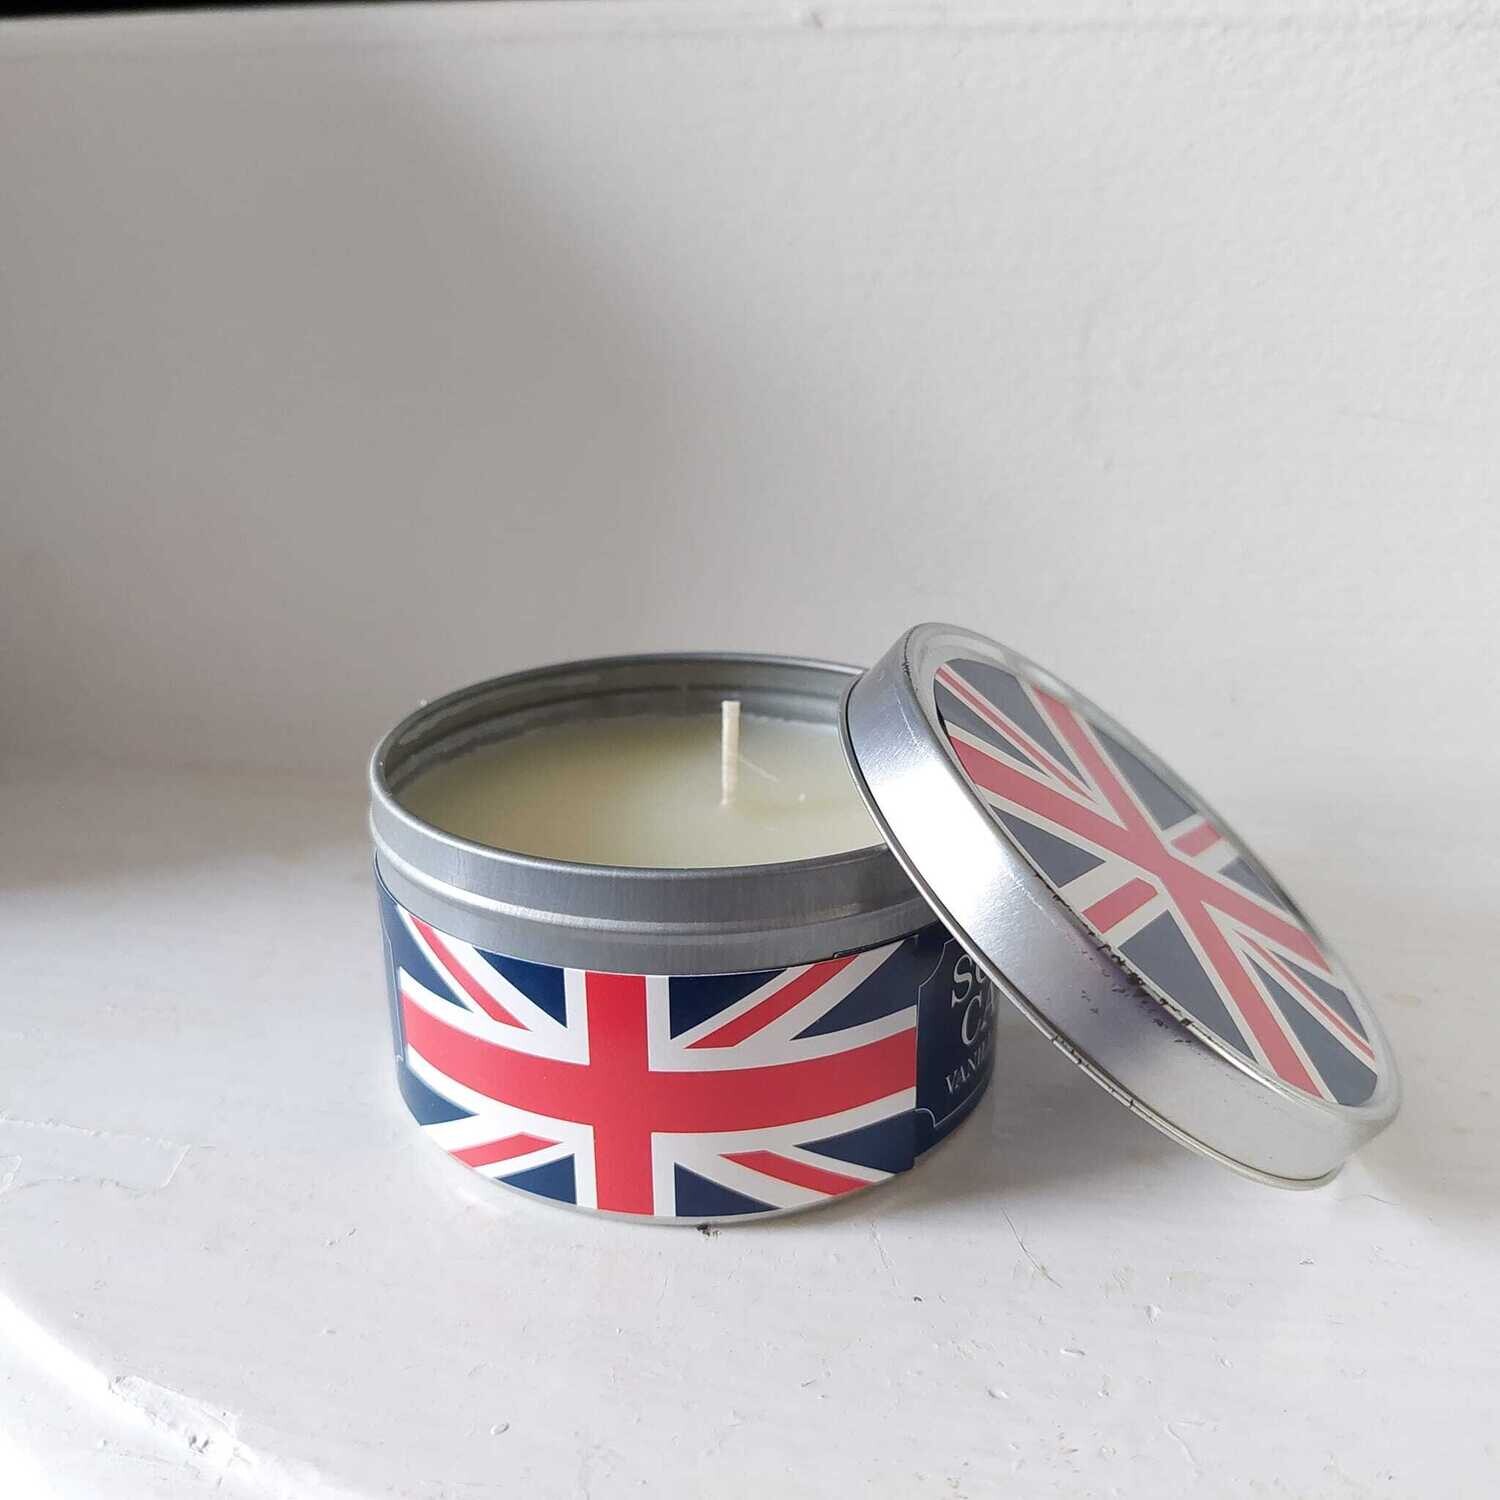 Vanilla Scented Candle in a Union Jack Tin Home Fragrance